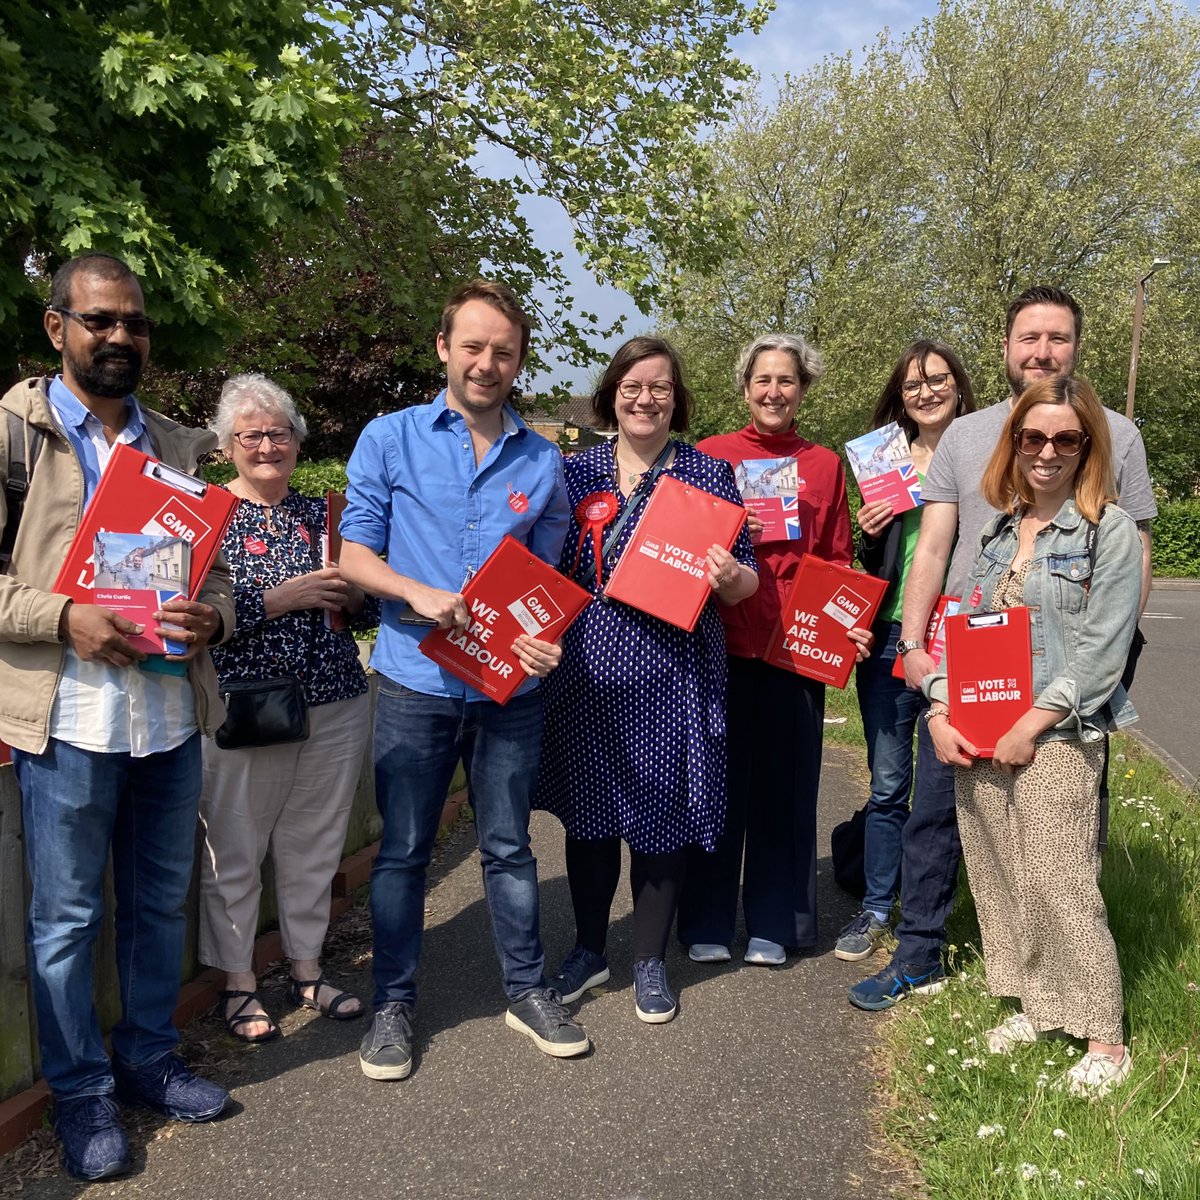 We’re still on a campaigning roll following the London Mayoral election! 🌹 Enjoyed getting straight back out to join @Pete_Marland and @chriscurtis94 for a ☀️ springtime canvass in #MiltonKeynes 🌹 Bring on the #GeneralElection #twinning